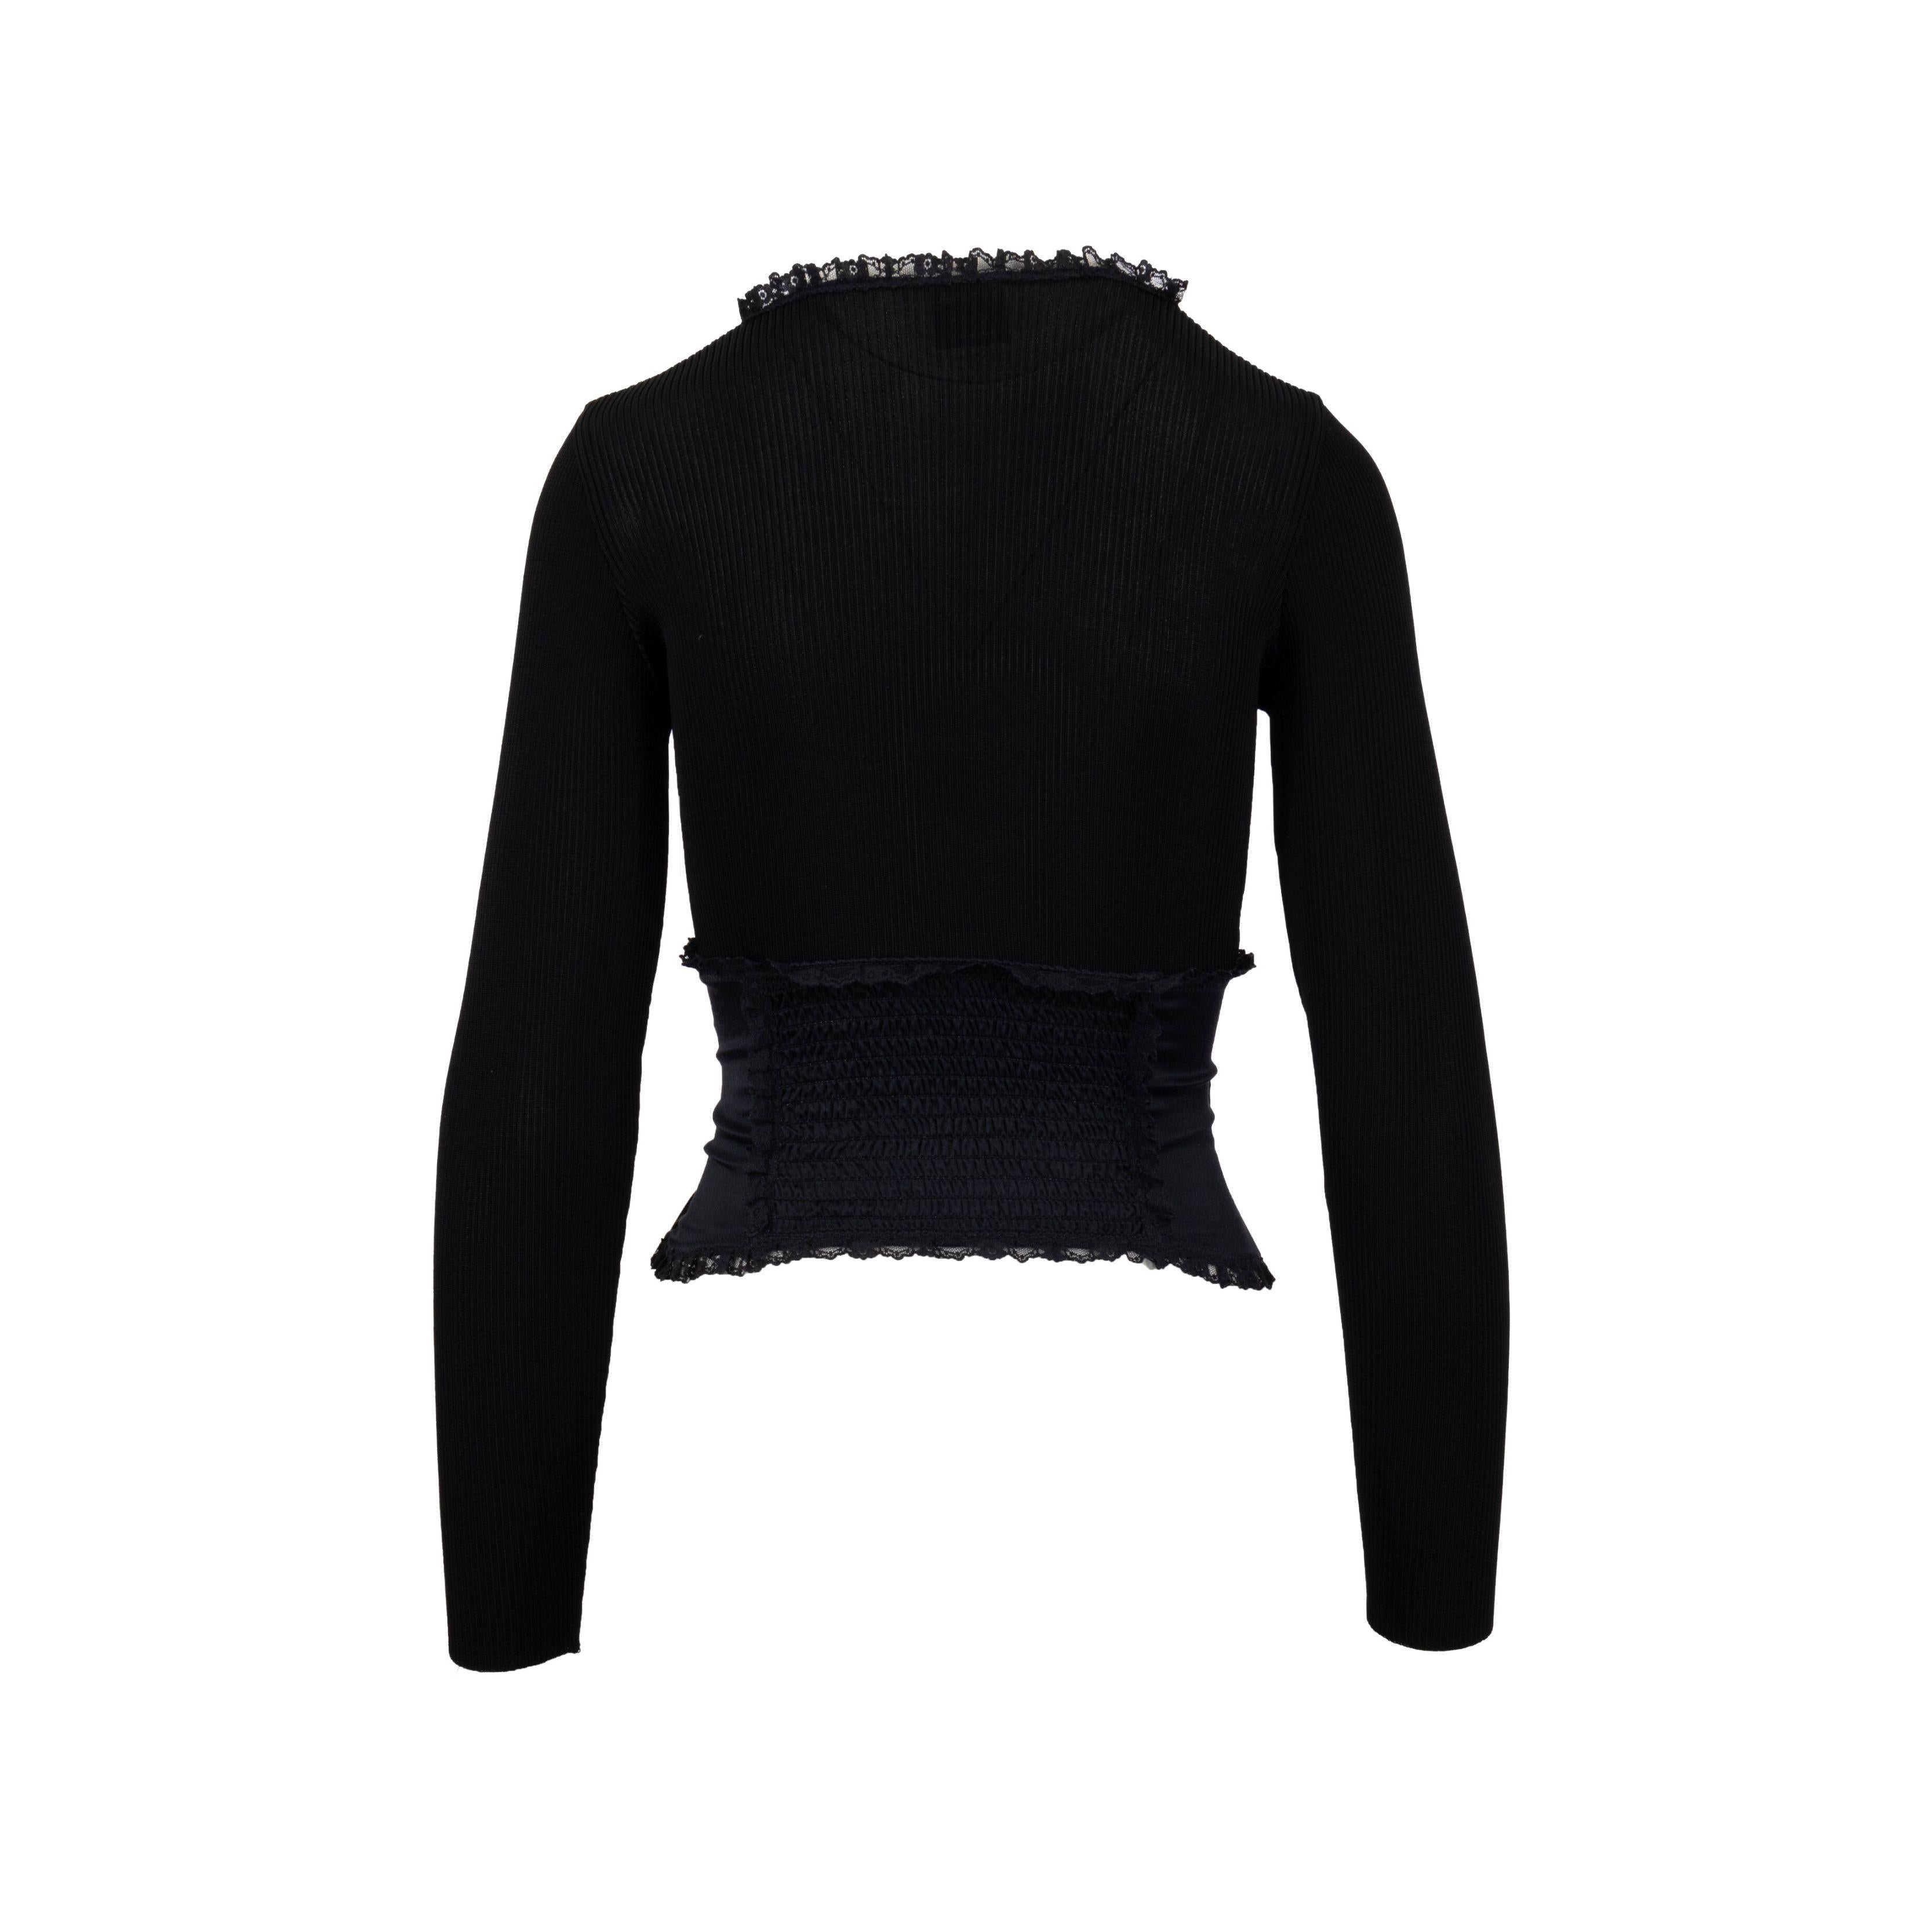 Crafted with a ribbed knit and featuring lace details on the deep round neck and long sleeves, the added corset provides a snug fit and is made of shiny silk with lace frills and string detailing. The back of the waist is ruched for a flattering